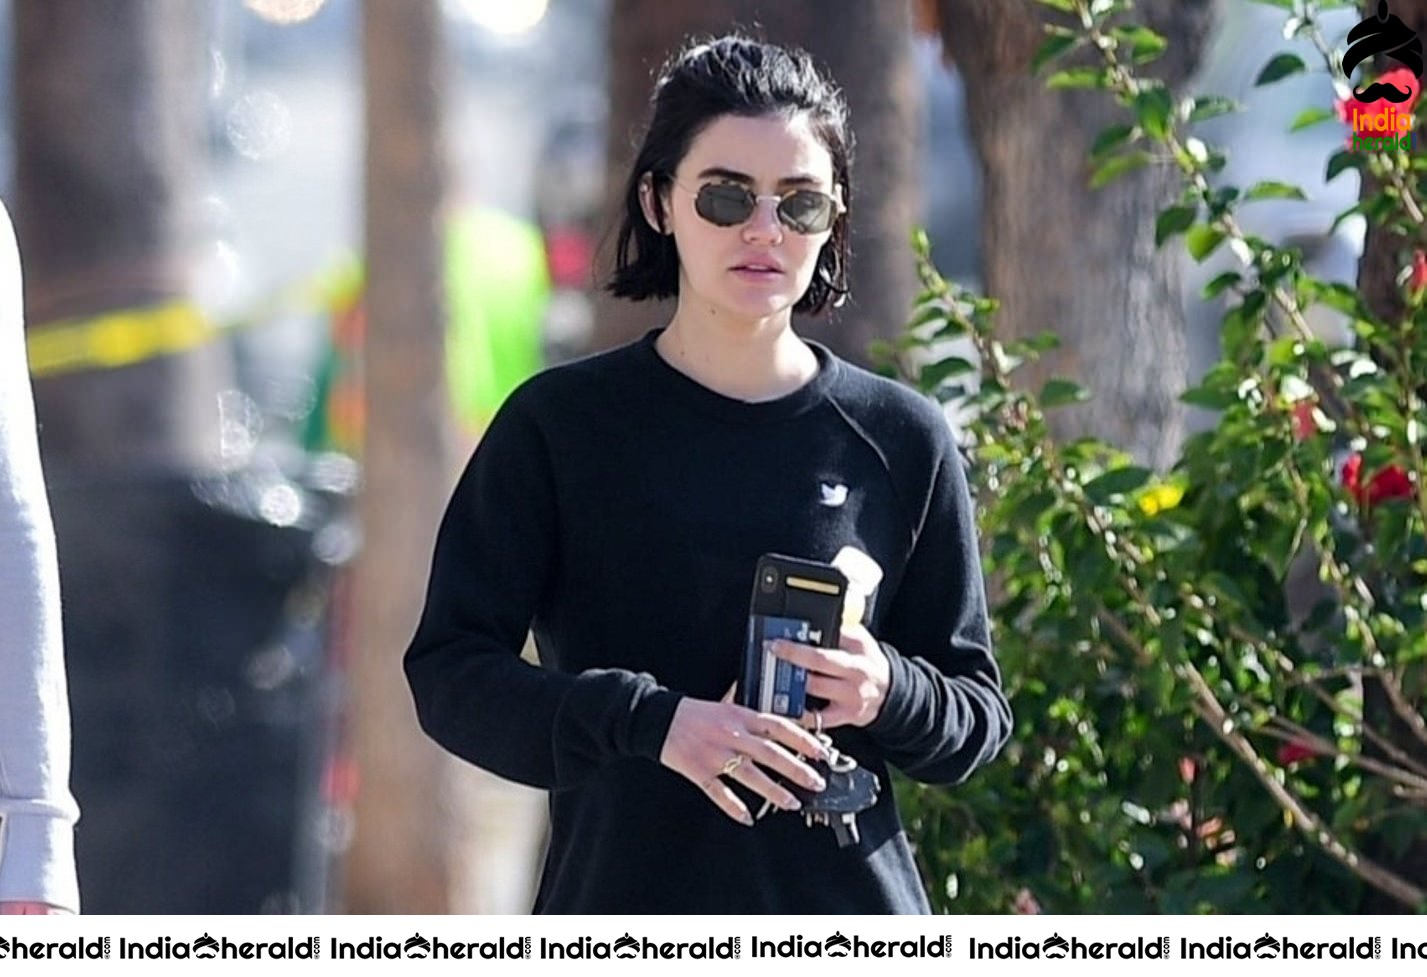 Lucy Hale caught by Paparazzi while running errands